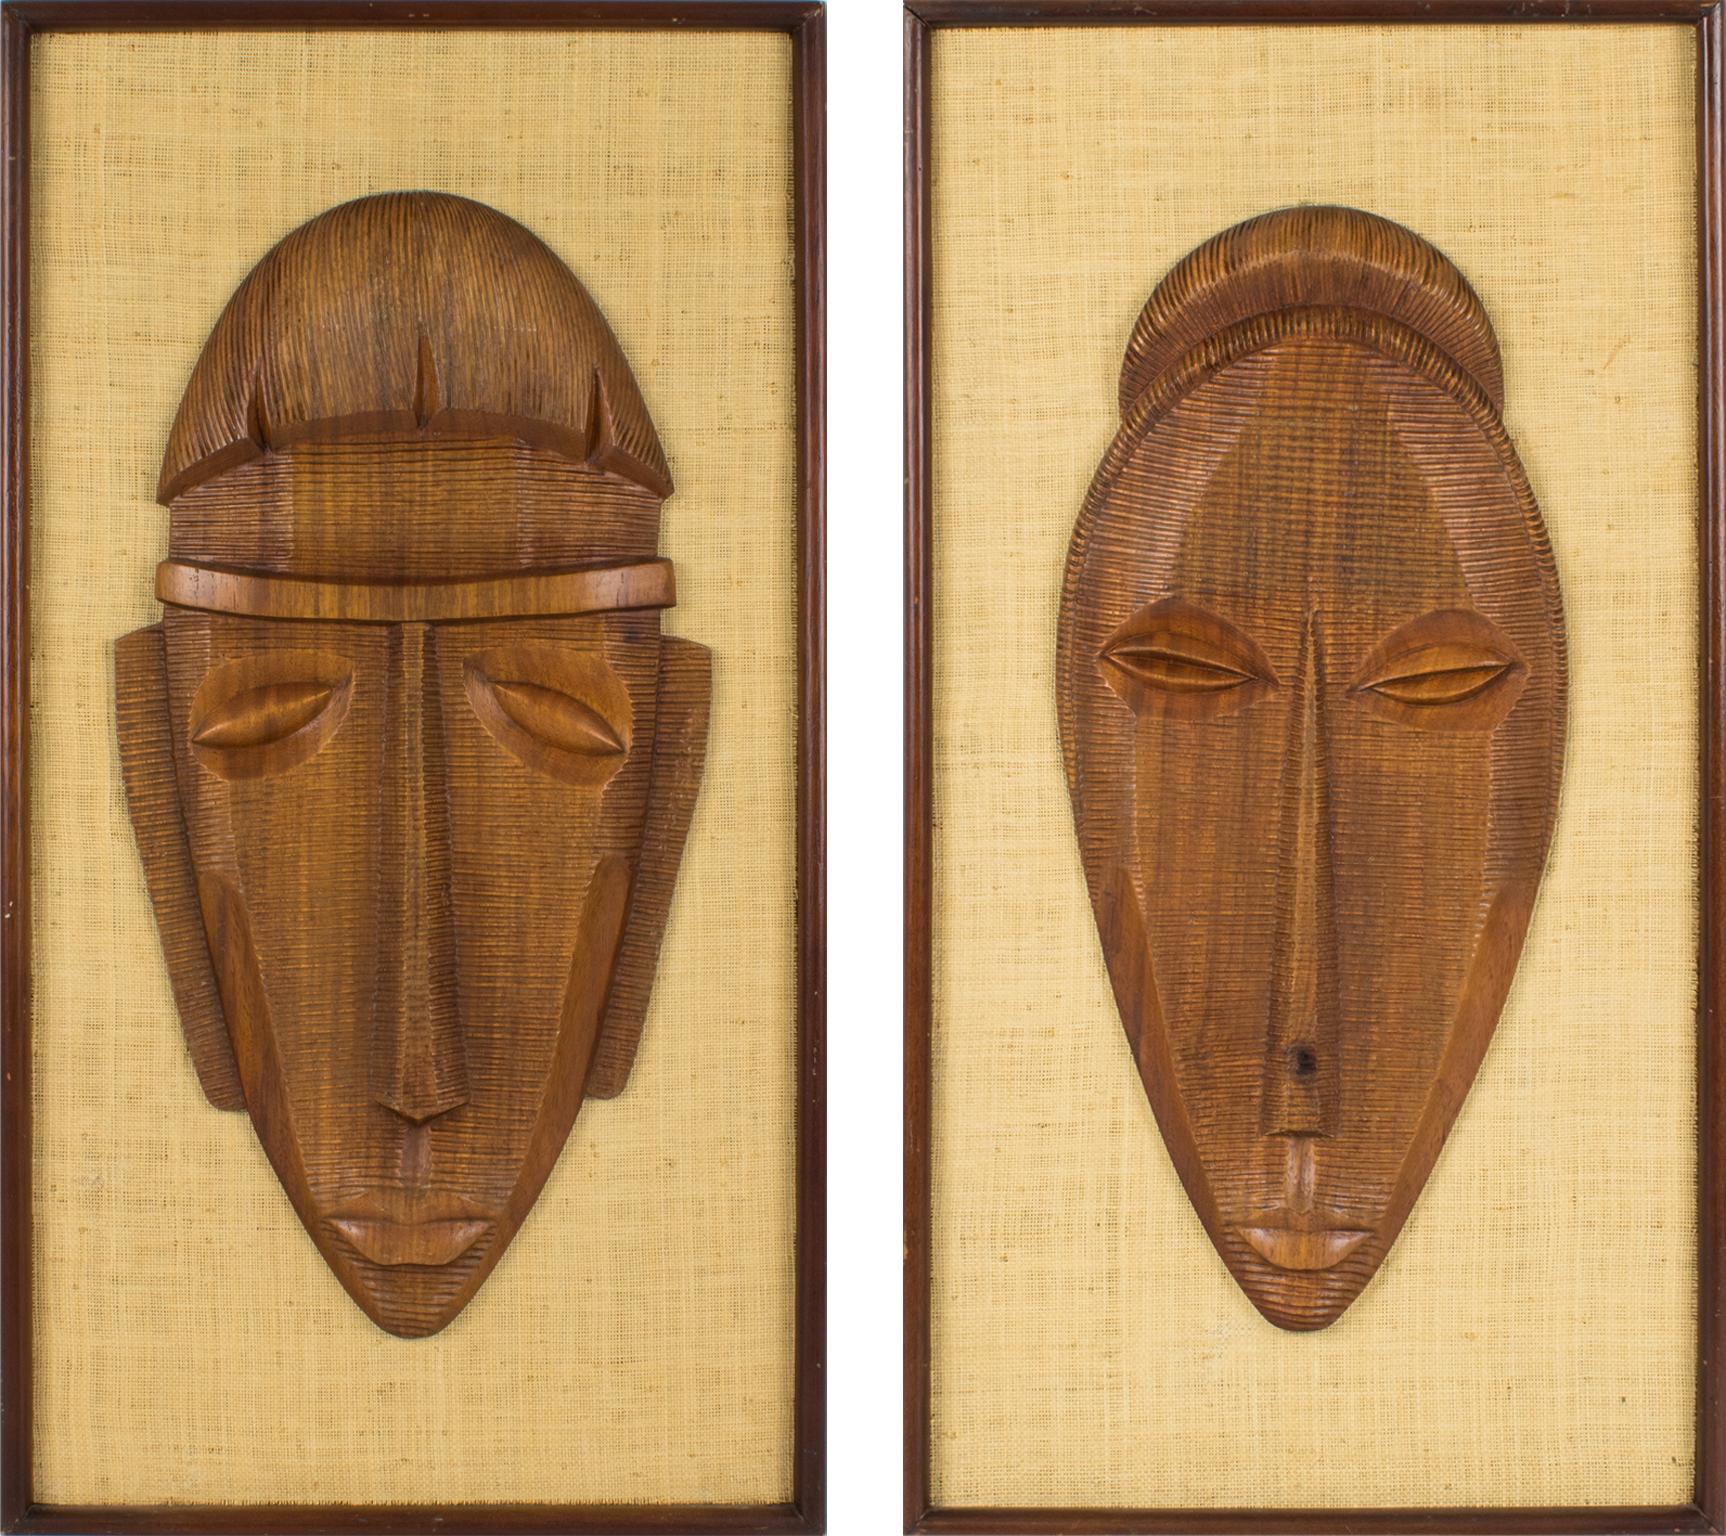 Unknown Figurative Sculpture - Mid-Century Carved Wood Relief Mask Wall Sculpture Panel, a pair